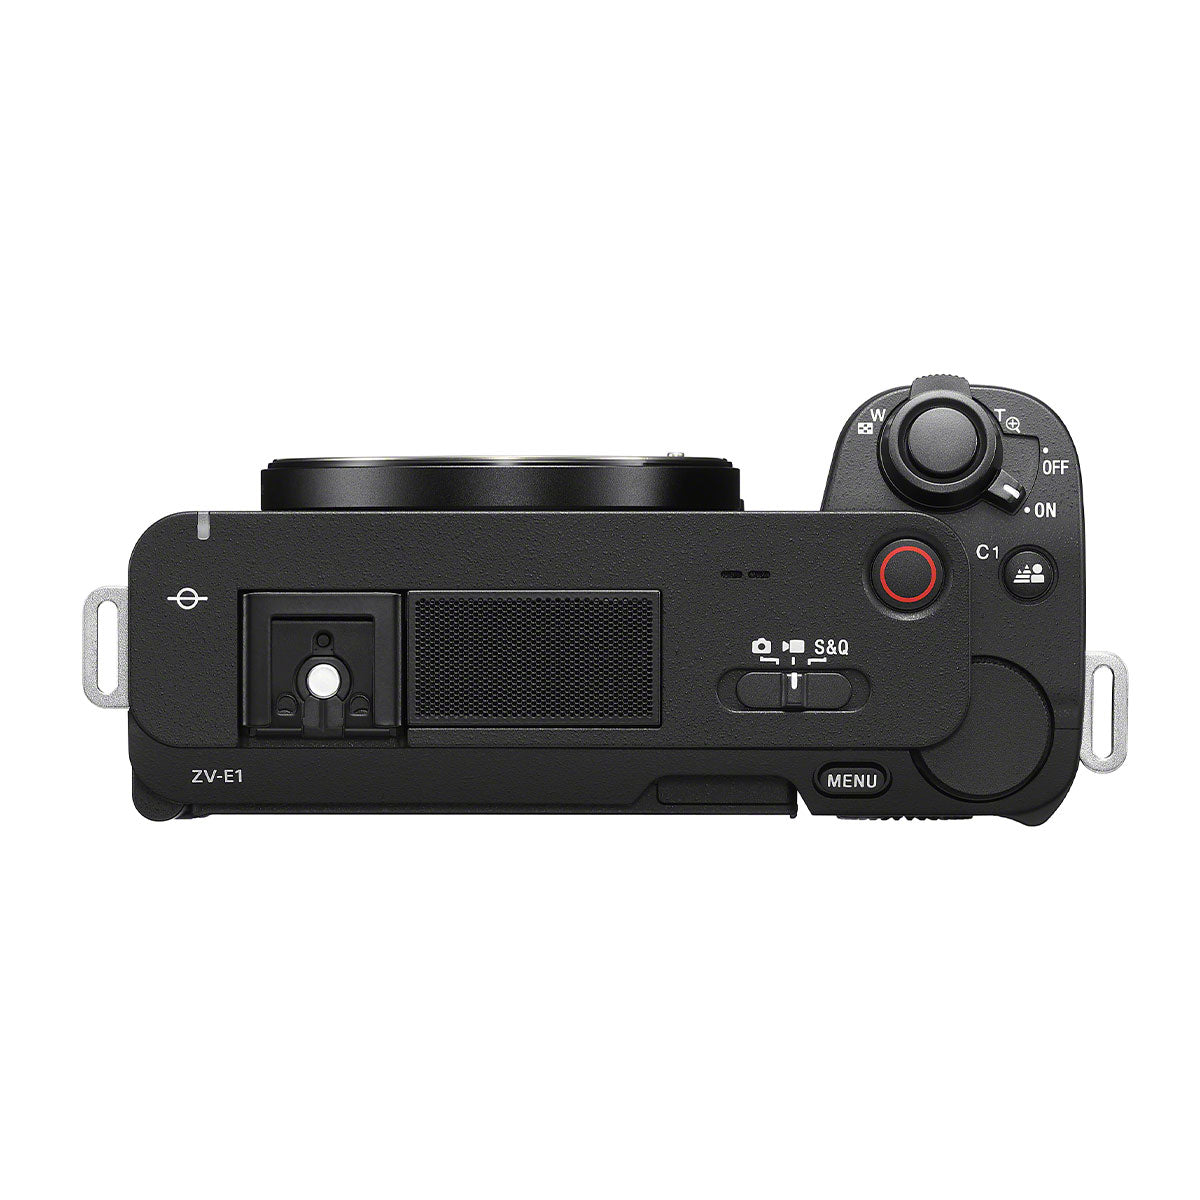 Sony's new ZV-E1: a potential game changer for video creators